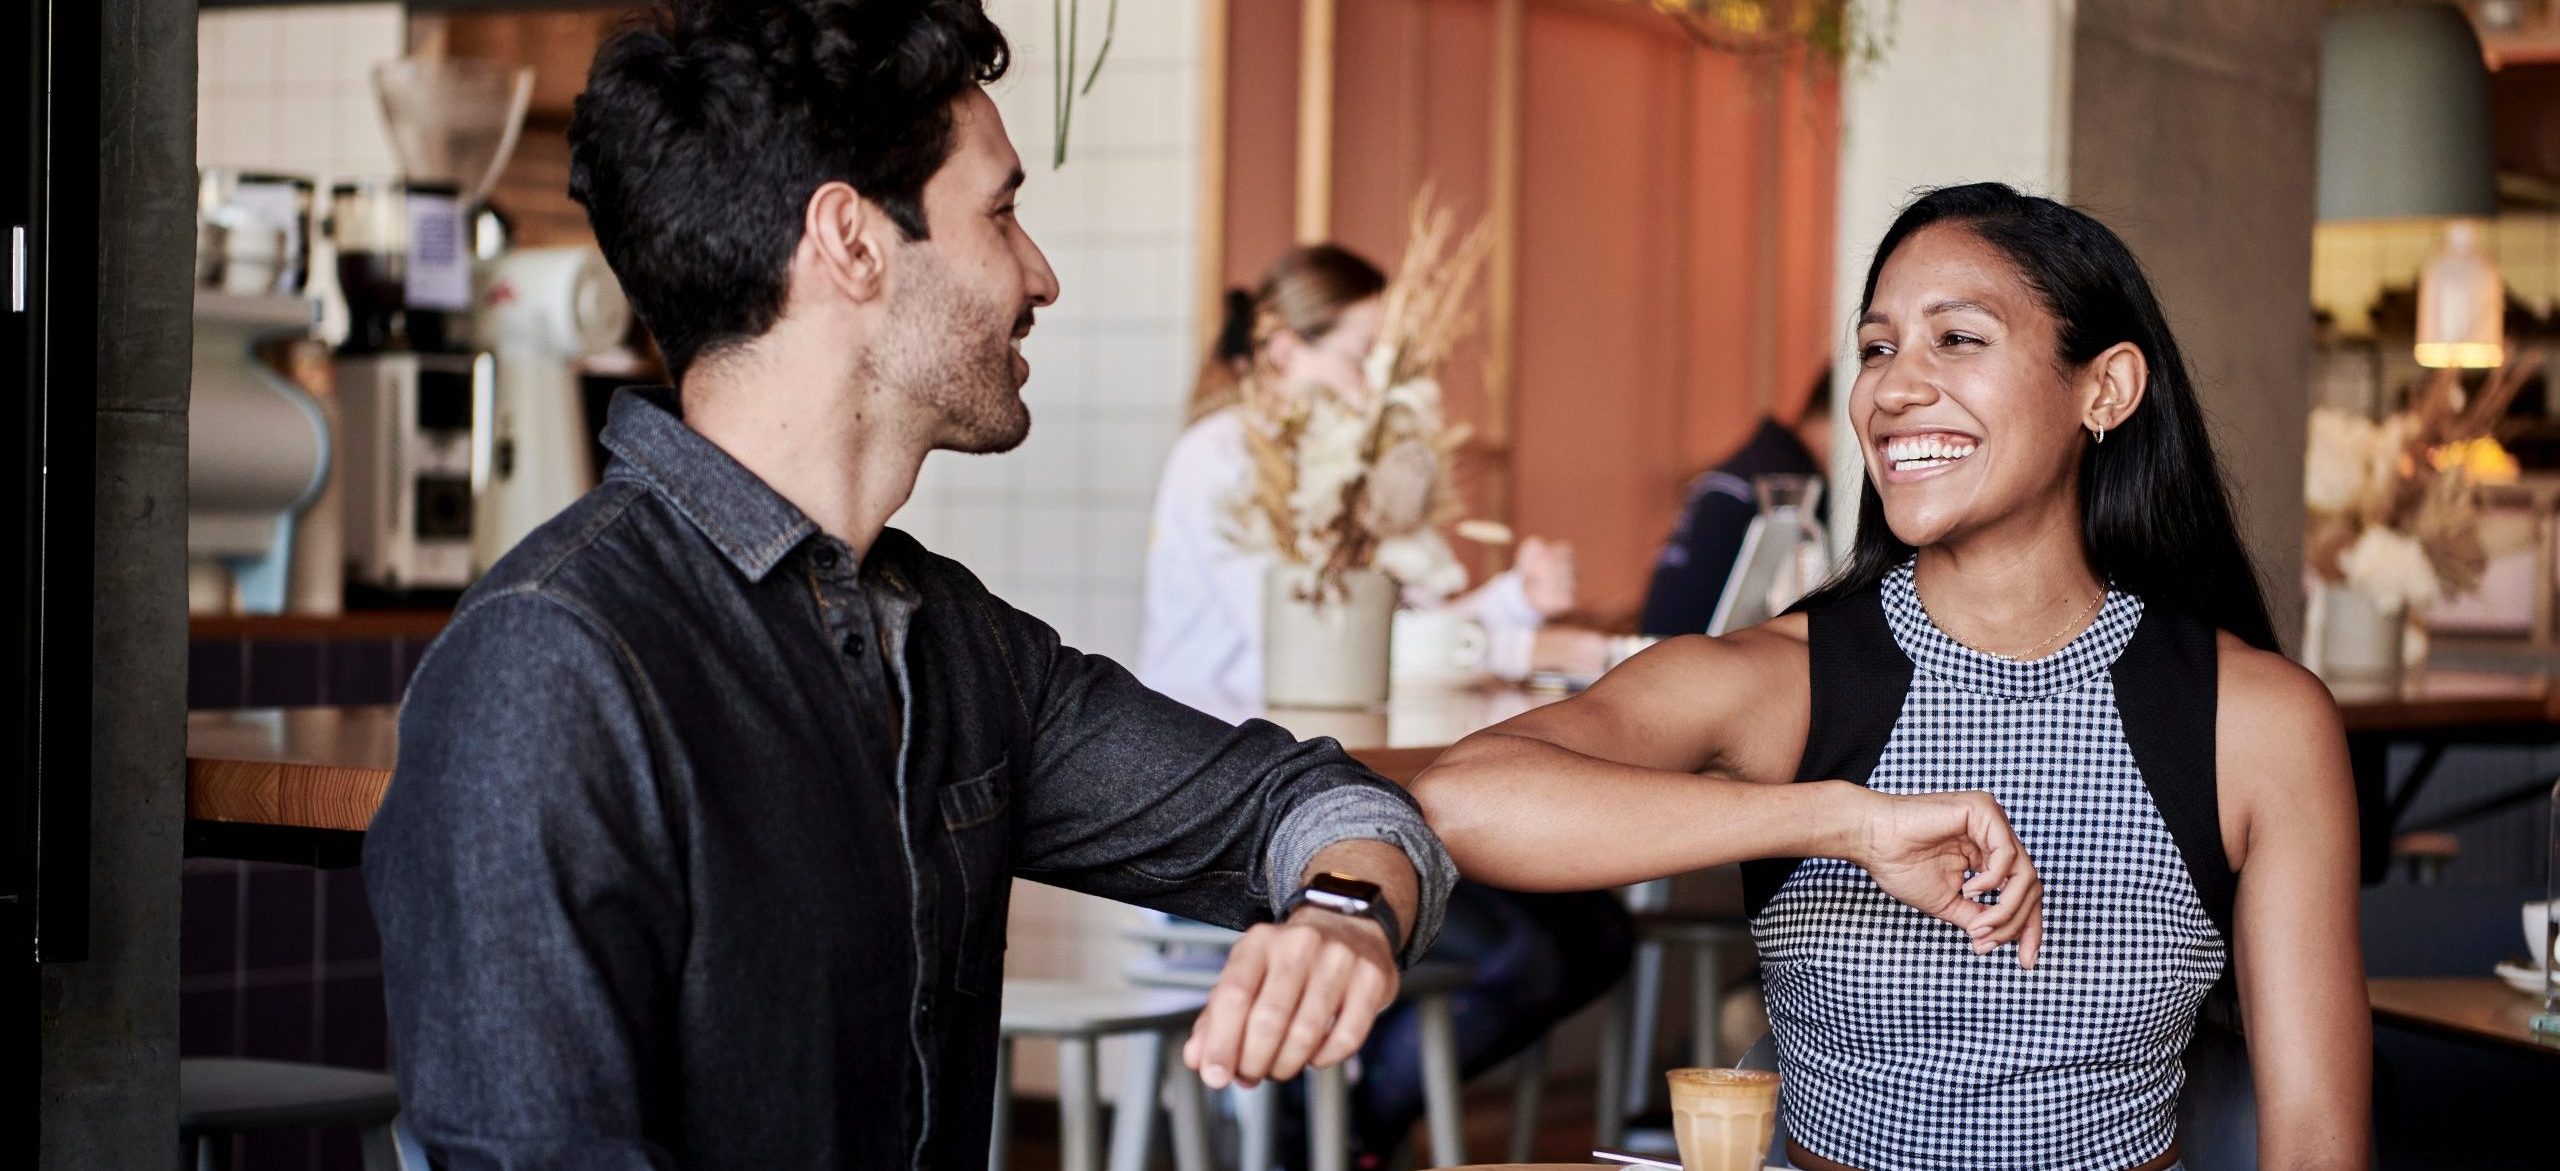 Man and woman wearing office attire are elbow bumping in a cafe. Both are smiling.